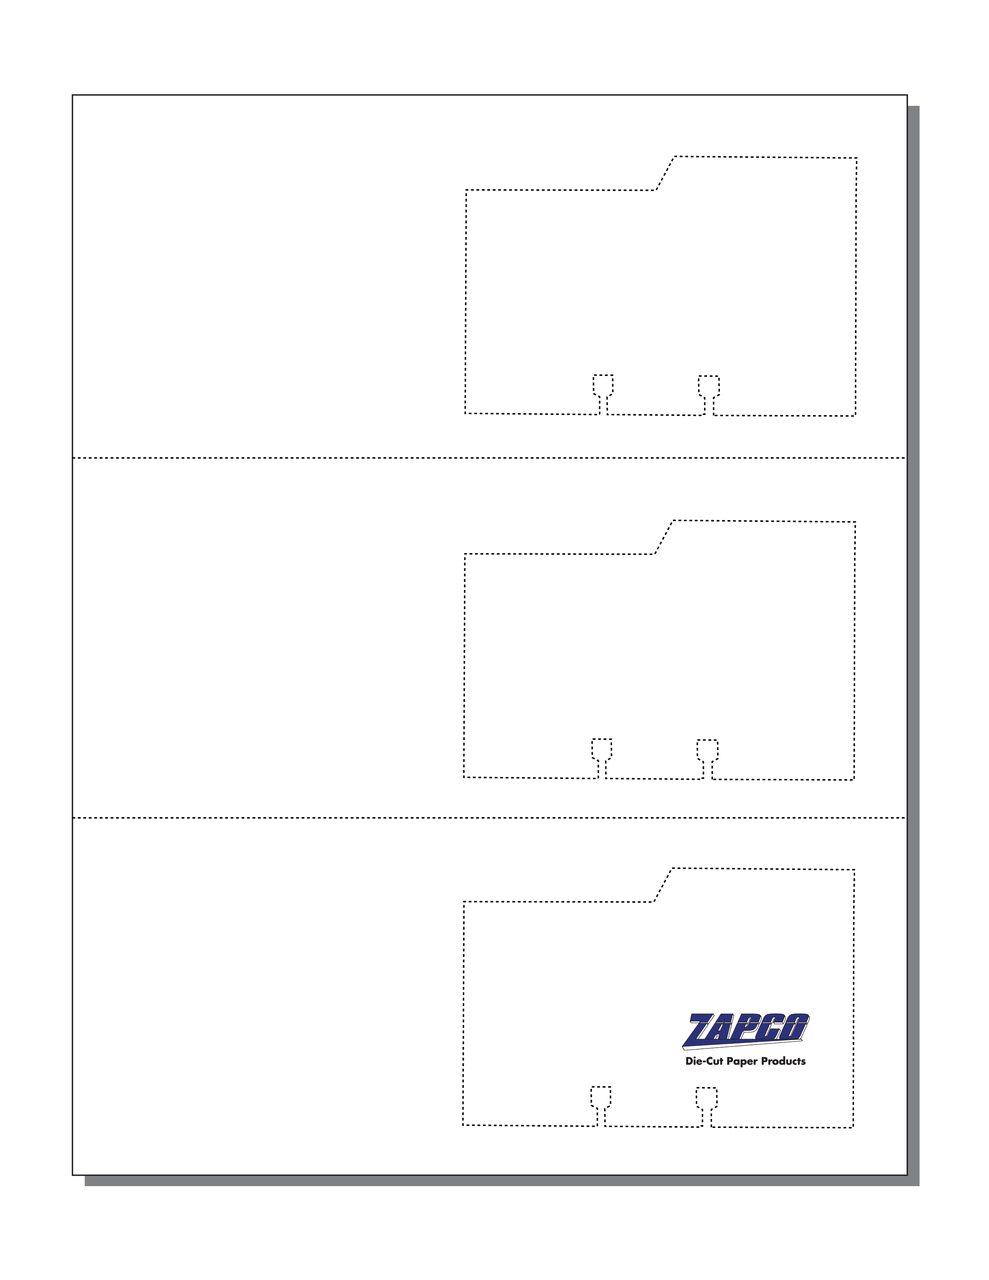 Item 124: 3-Up 3 2/3" x 8 1/2" Rotary File Card Mailer 8 1/2" x 11" Sheet(250 Sheets)